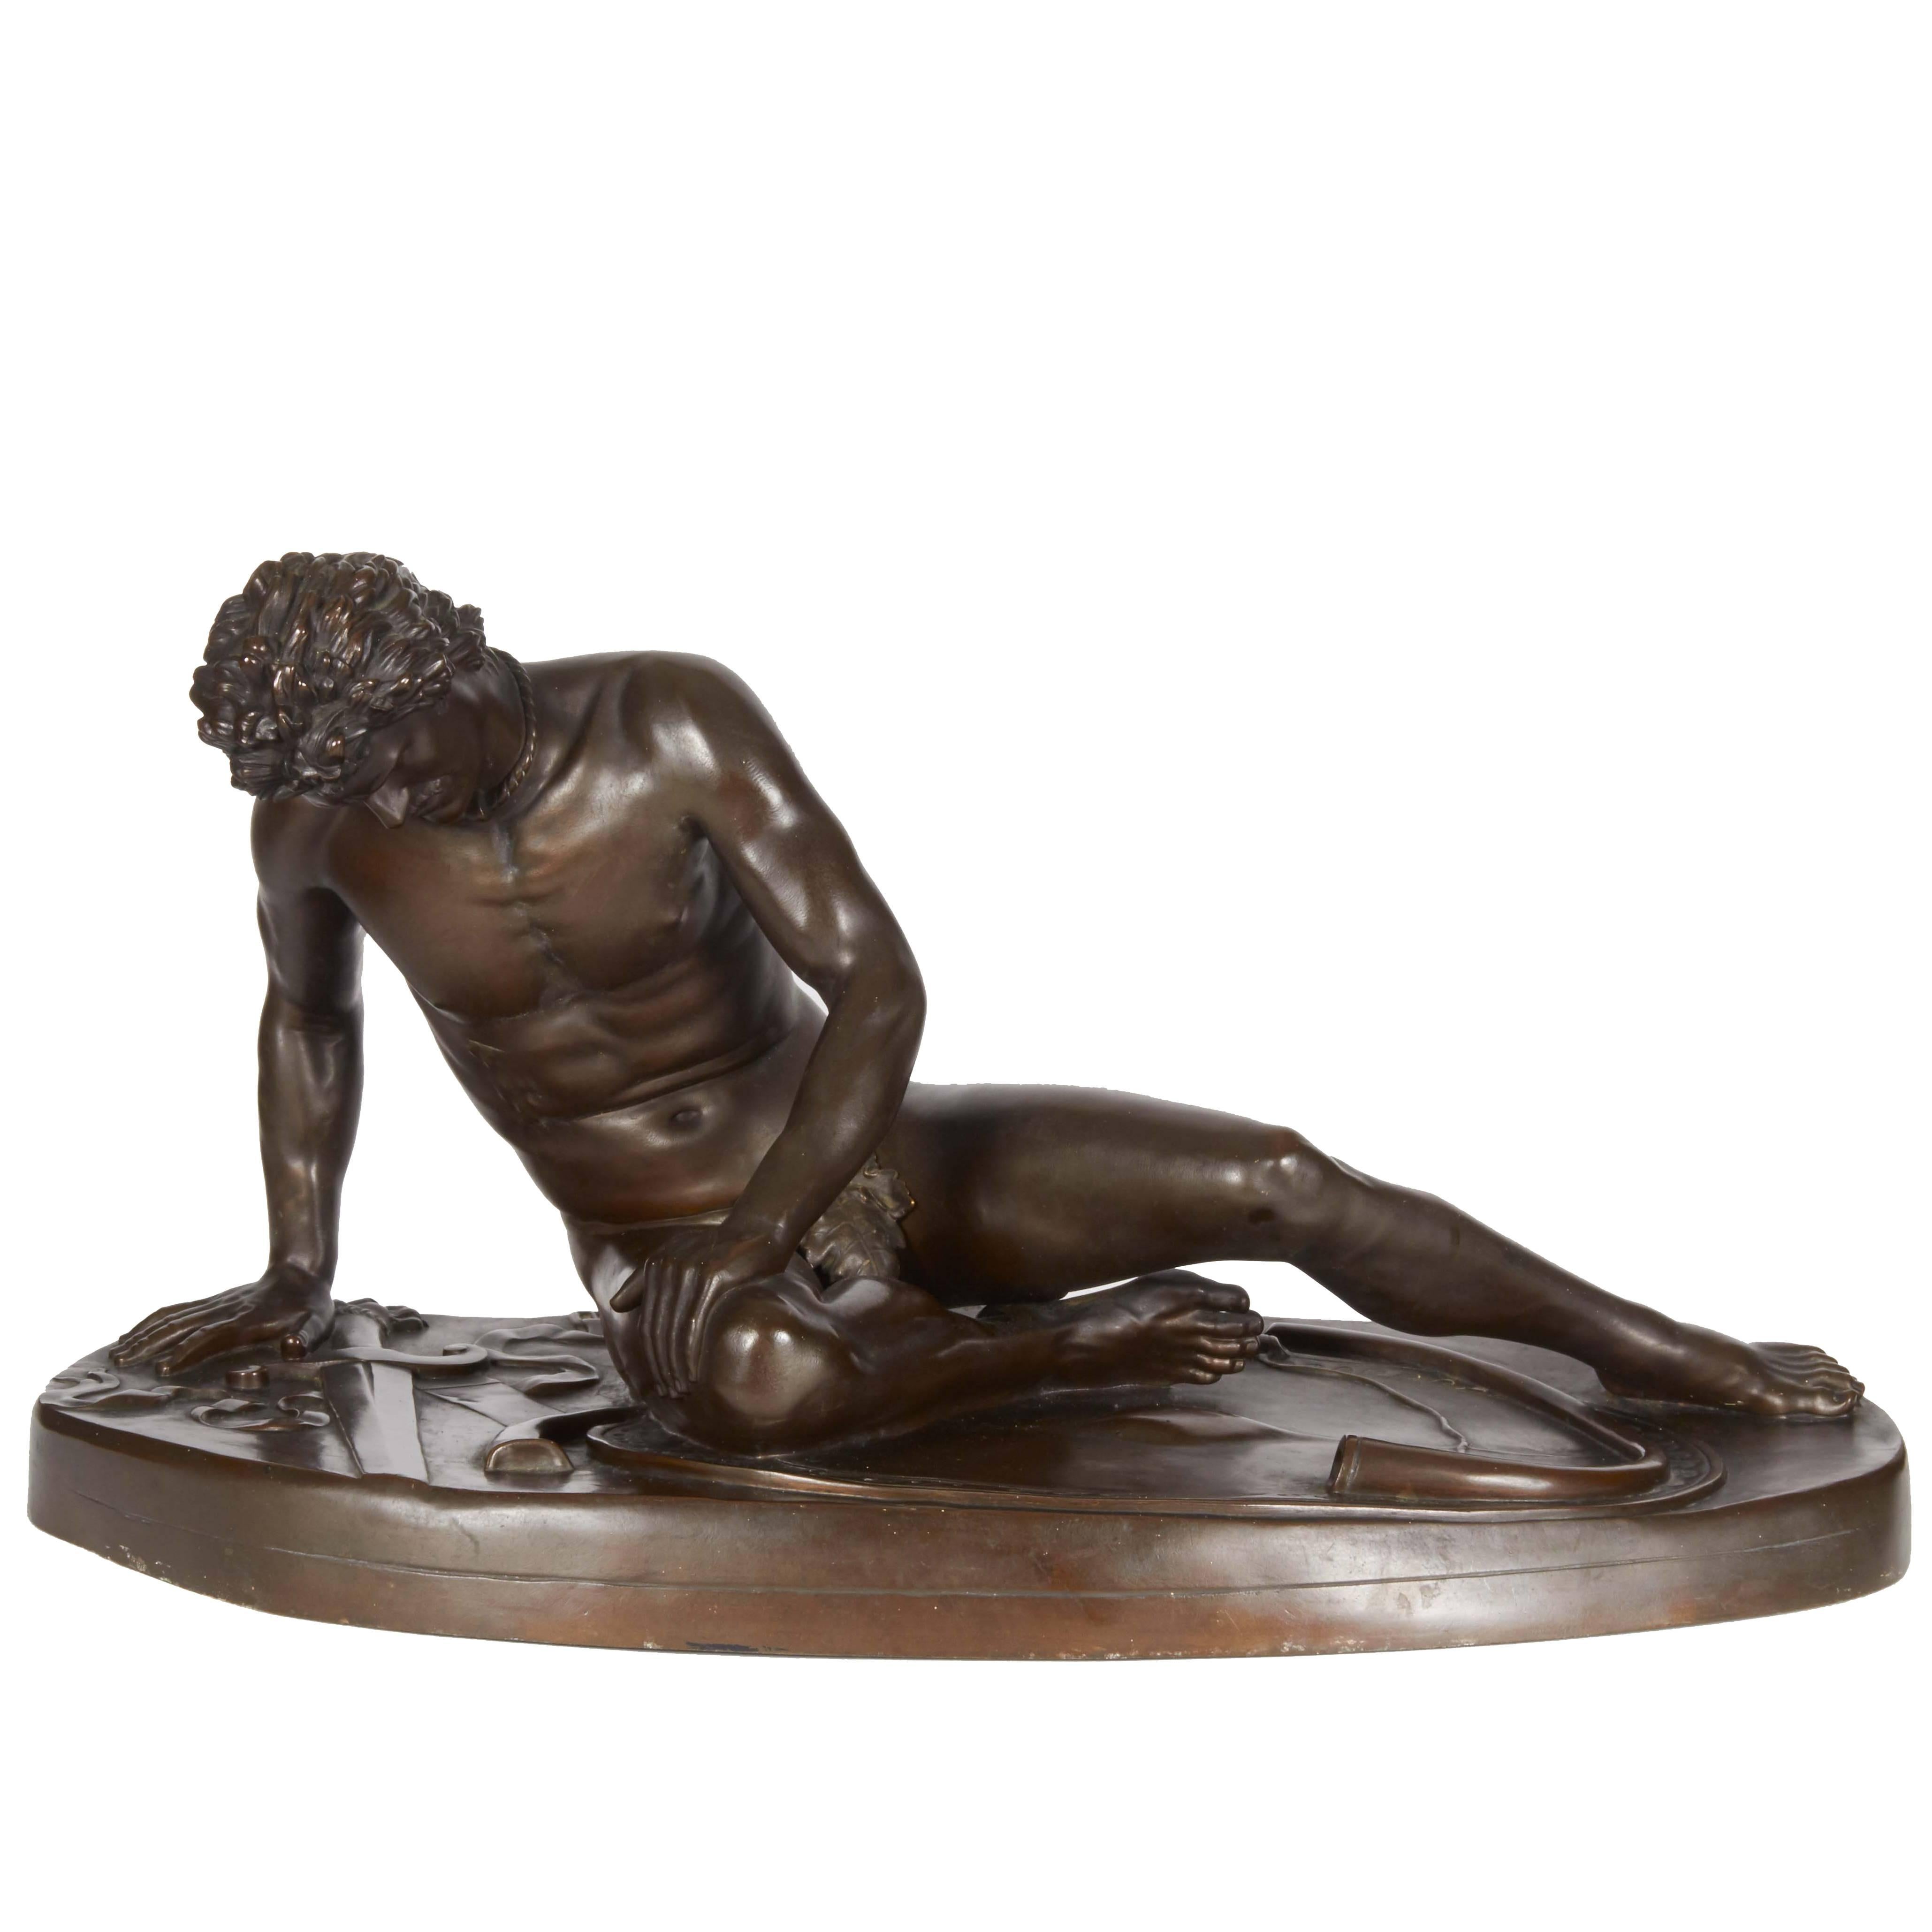 French Bronze Sculpture "The Dying Gaul" after the Antique Signed F. Barbedienne